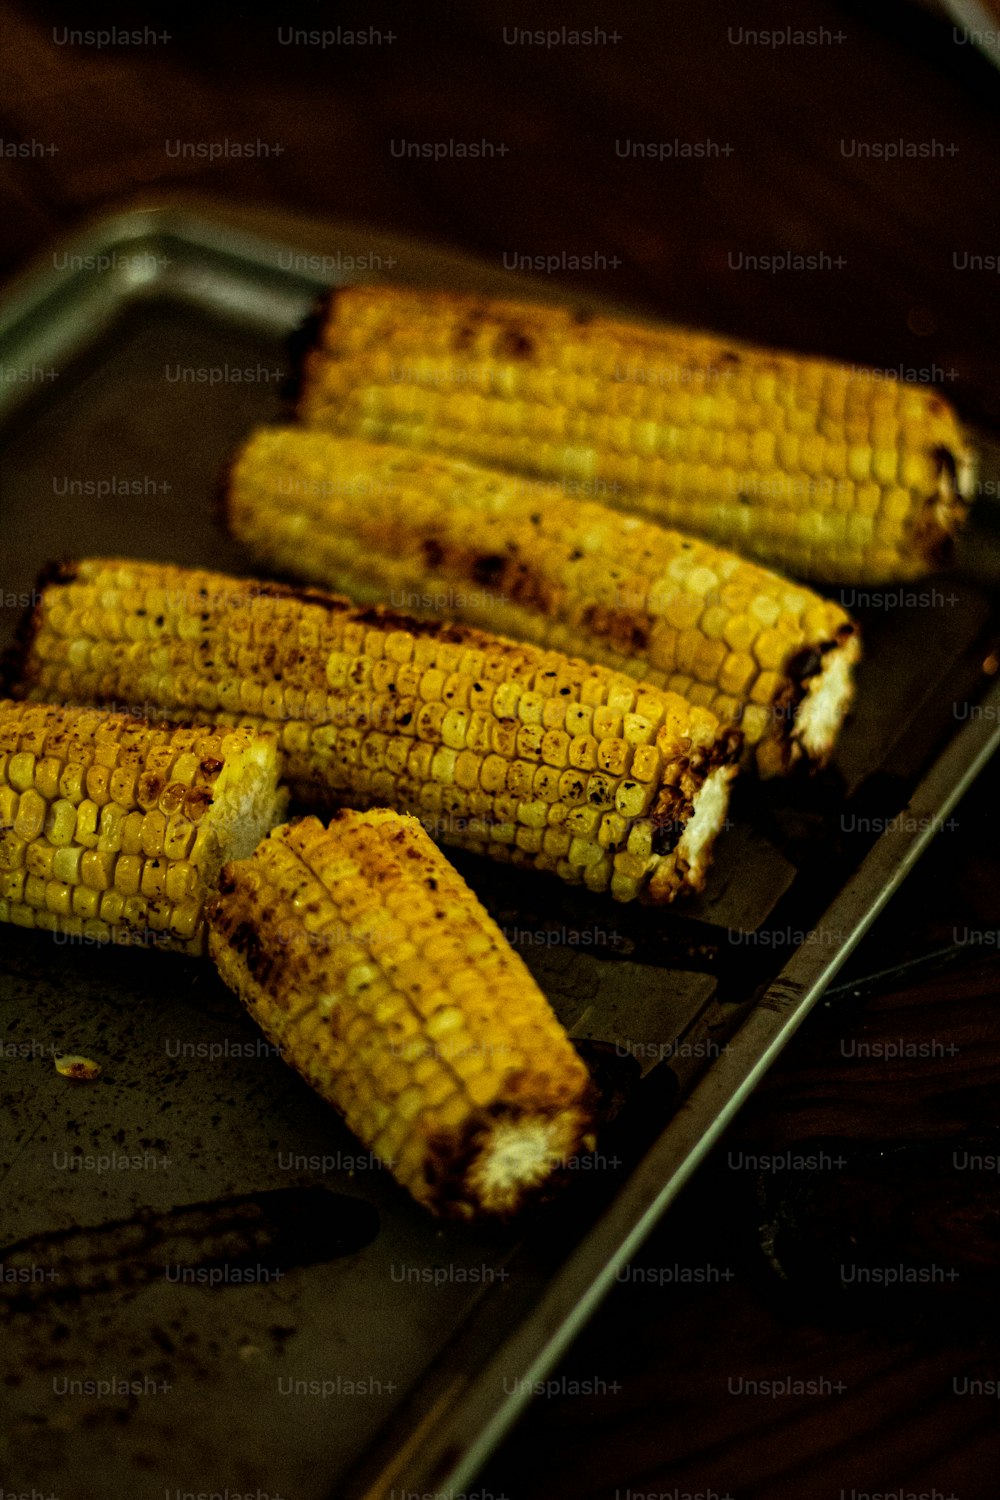 grilled corn on the cob on a baking sheet